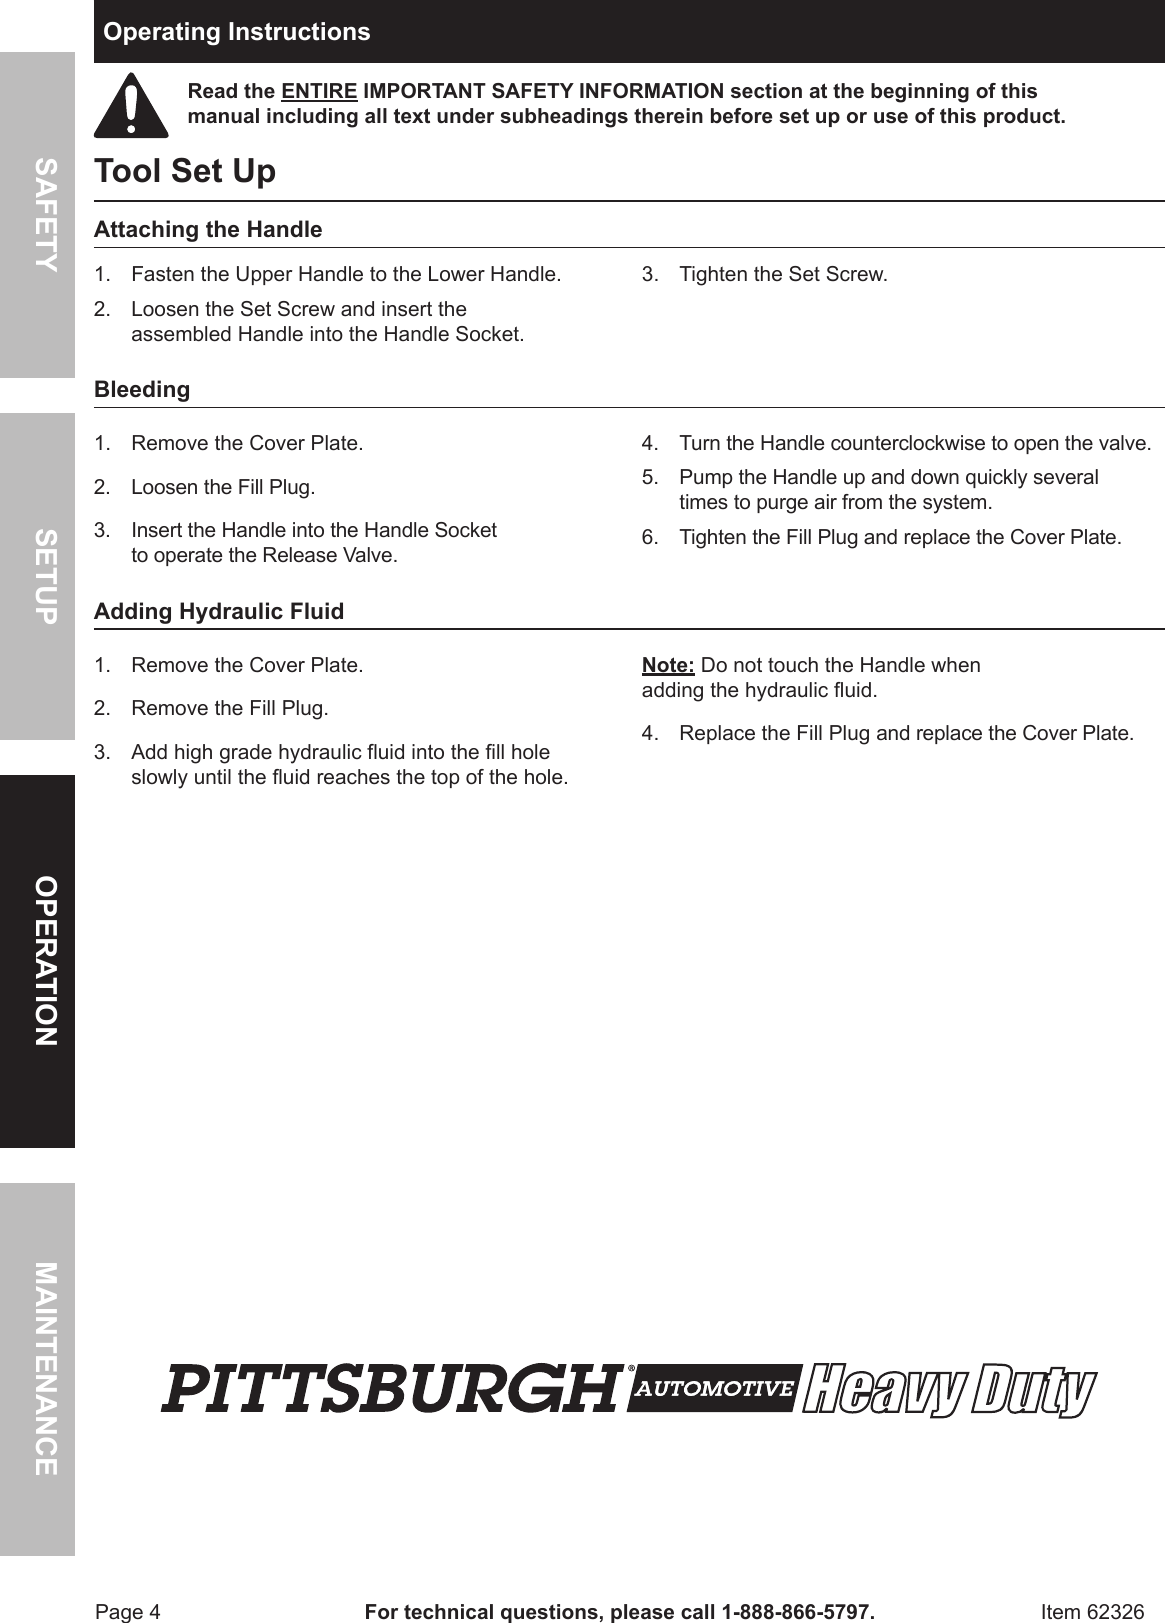 Page 4 of 8 - Manual For The 62326 3 Ton Low Profile Steel Heavy Duty Floor Jack With Rapid Pump®